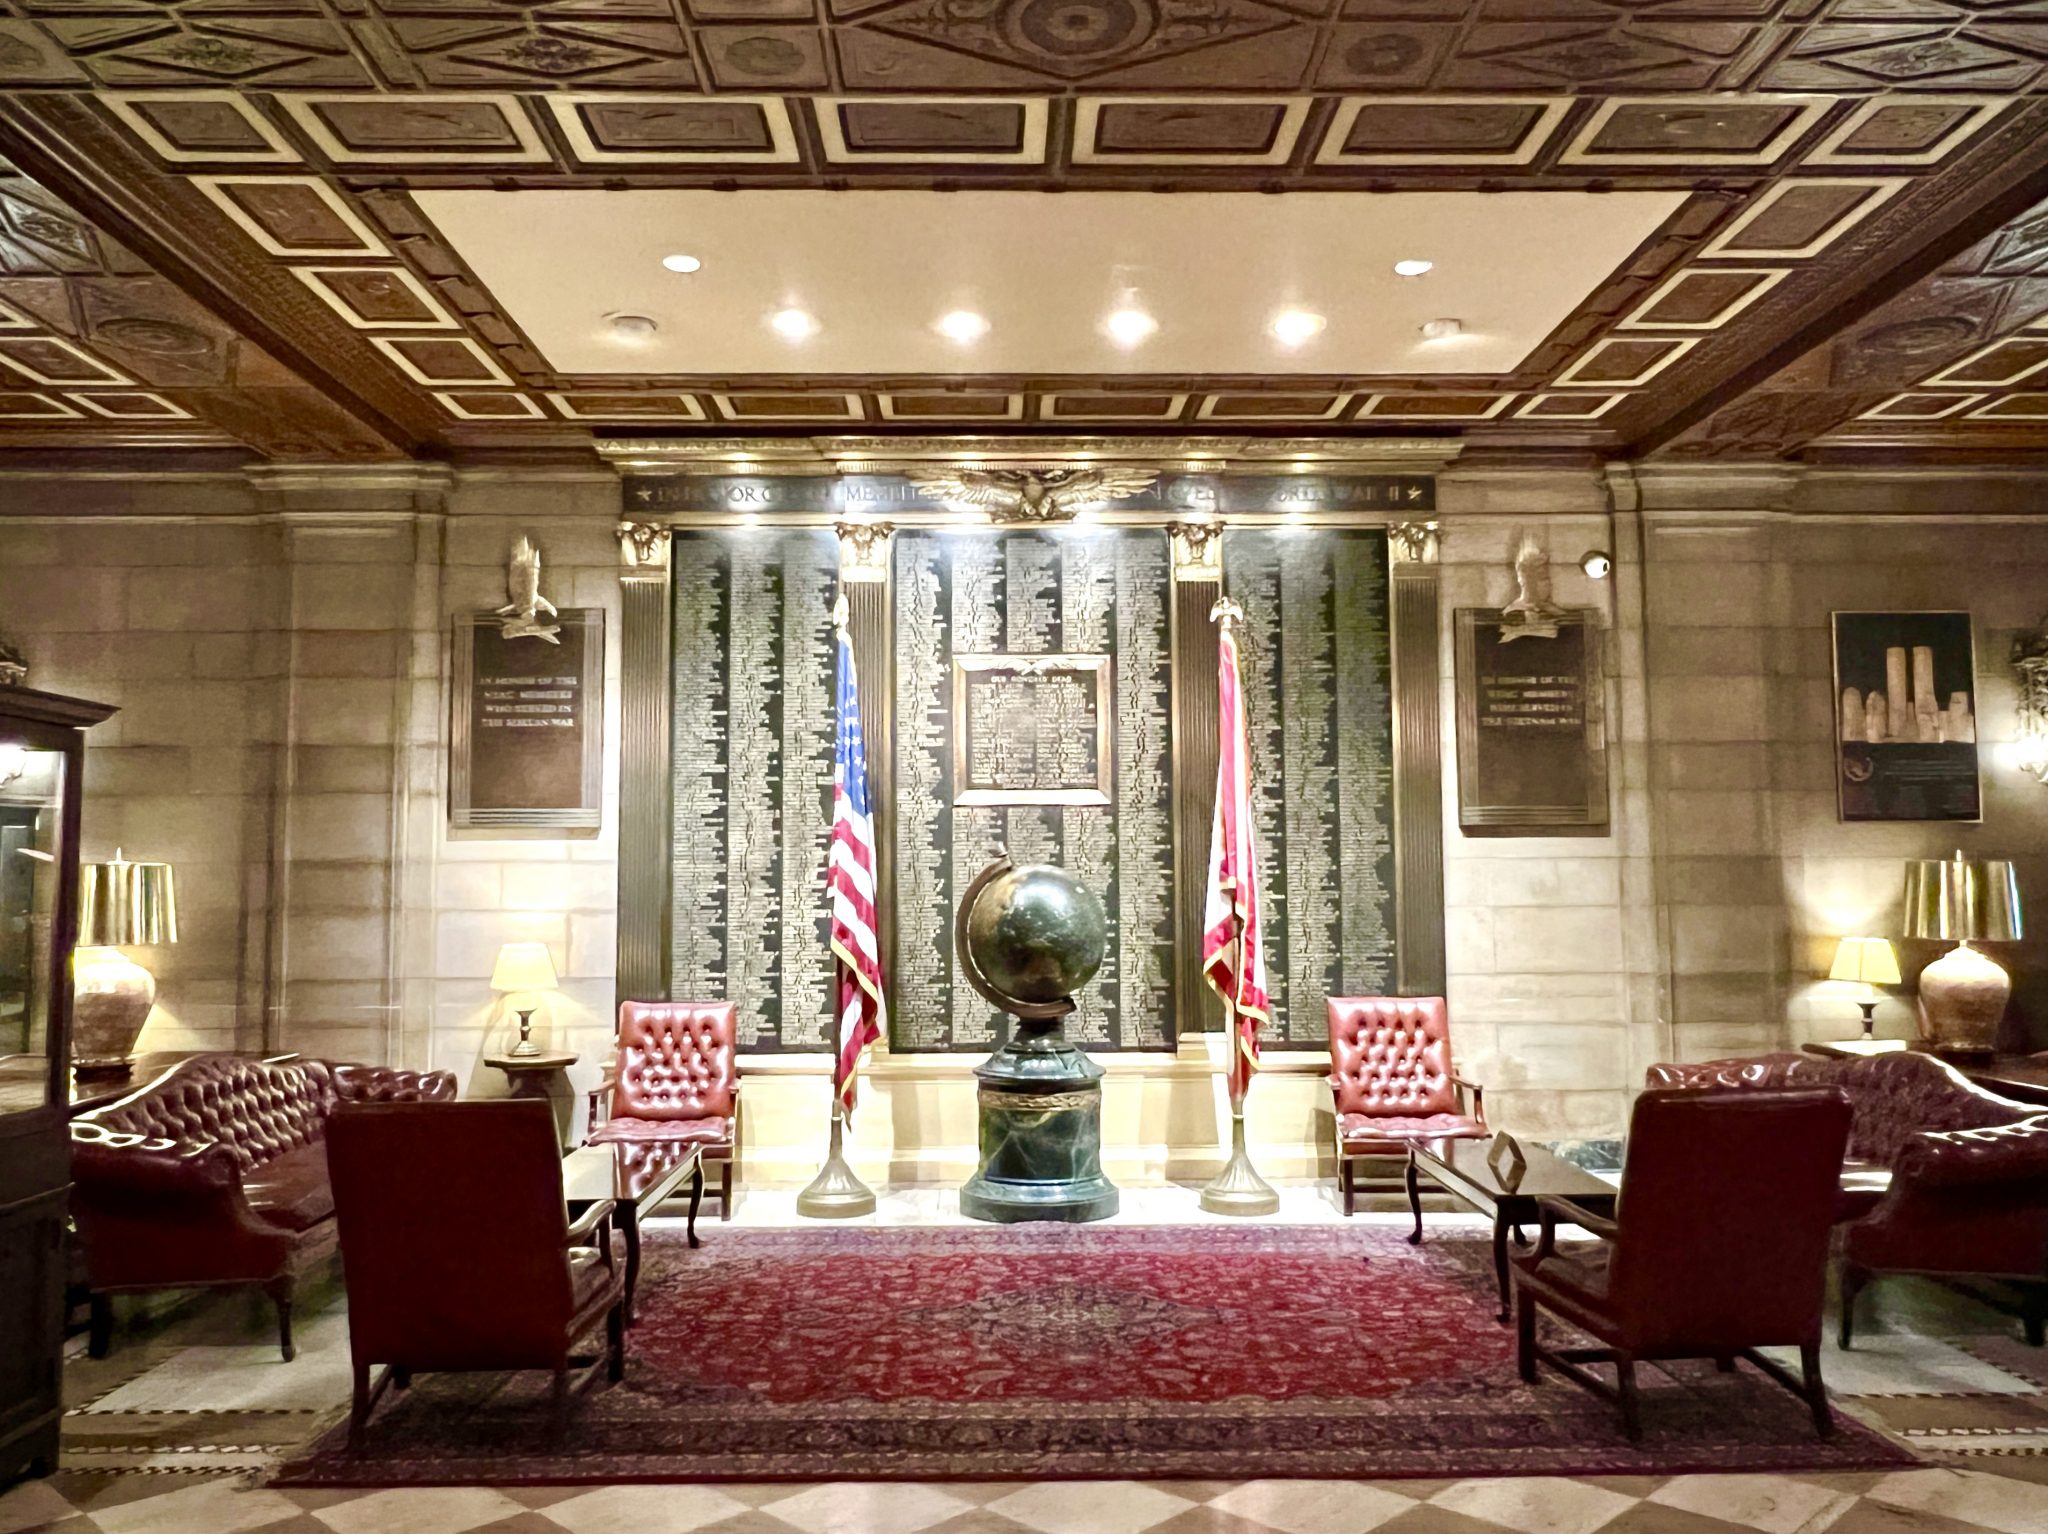 Staying at the New York Athletic Club (NYAC) - LittleWanderingWren